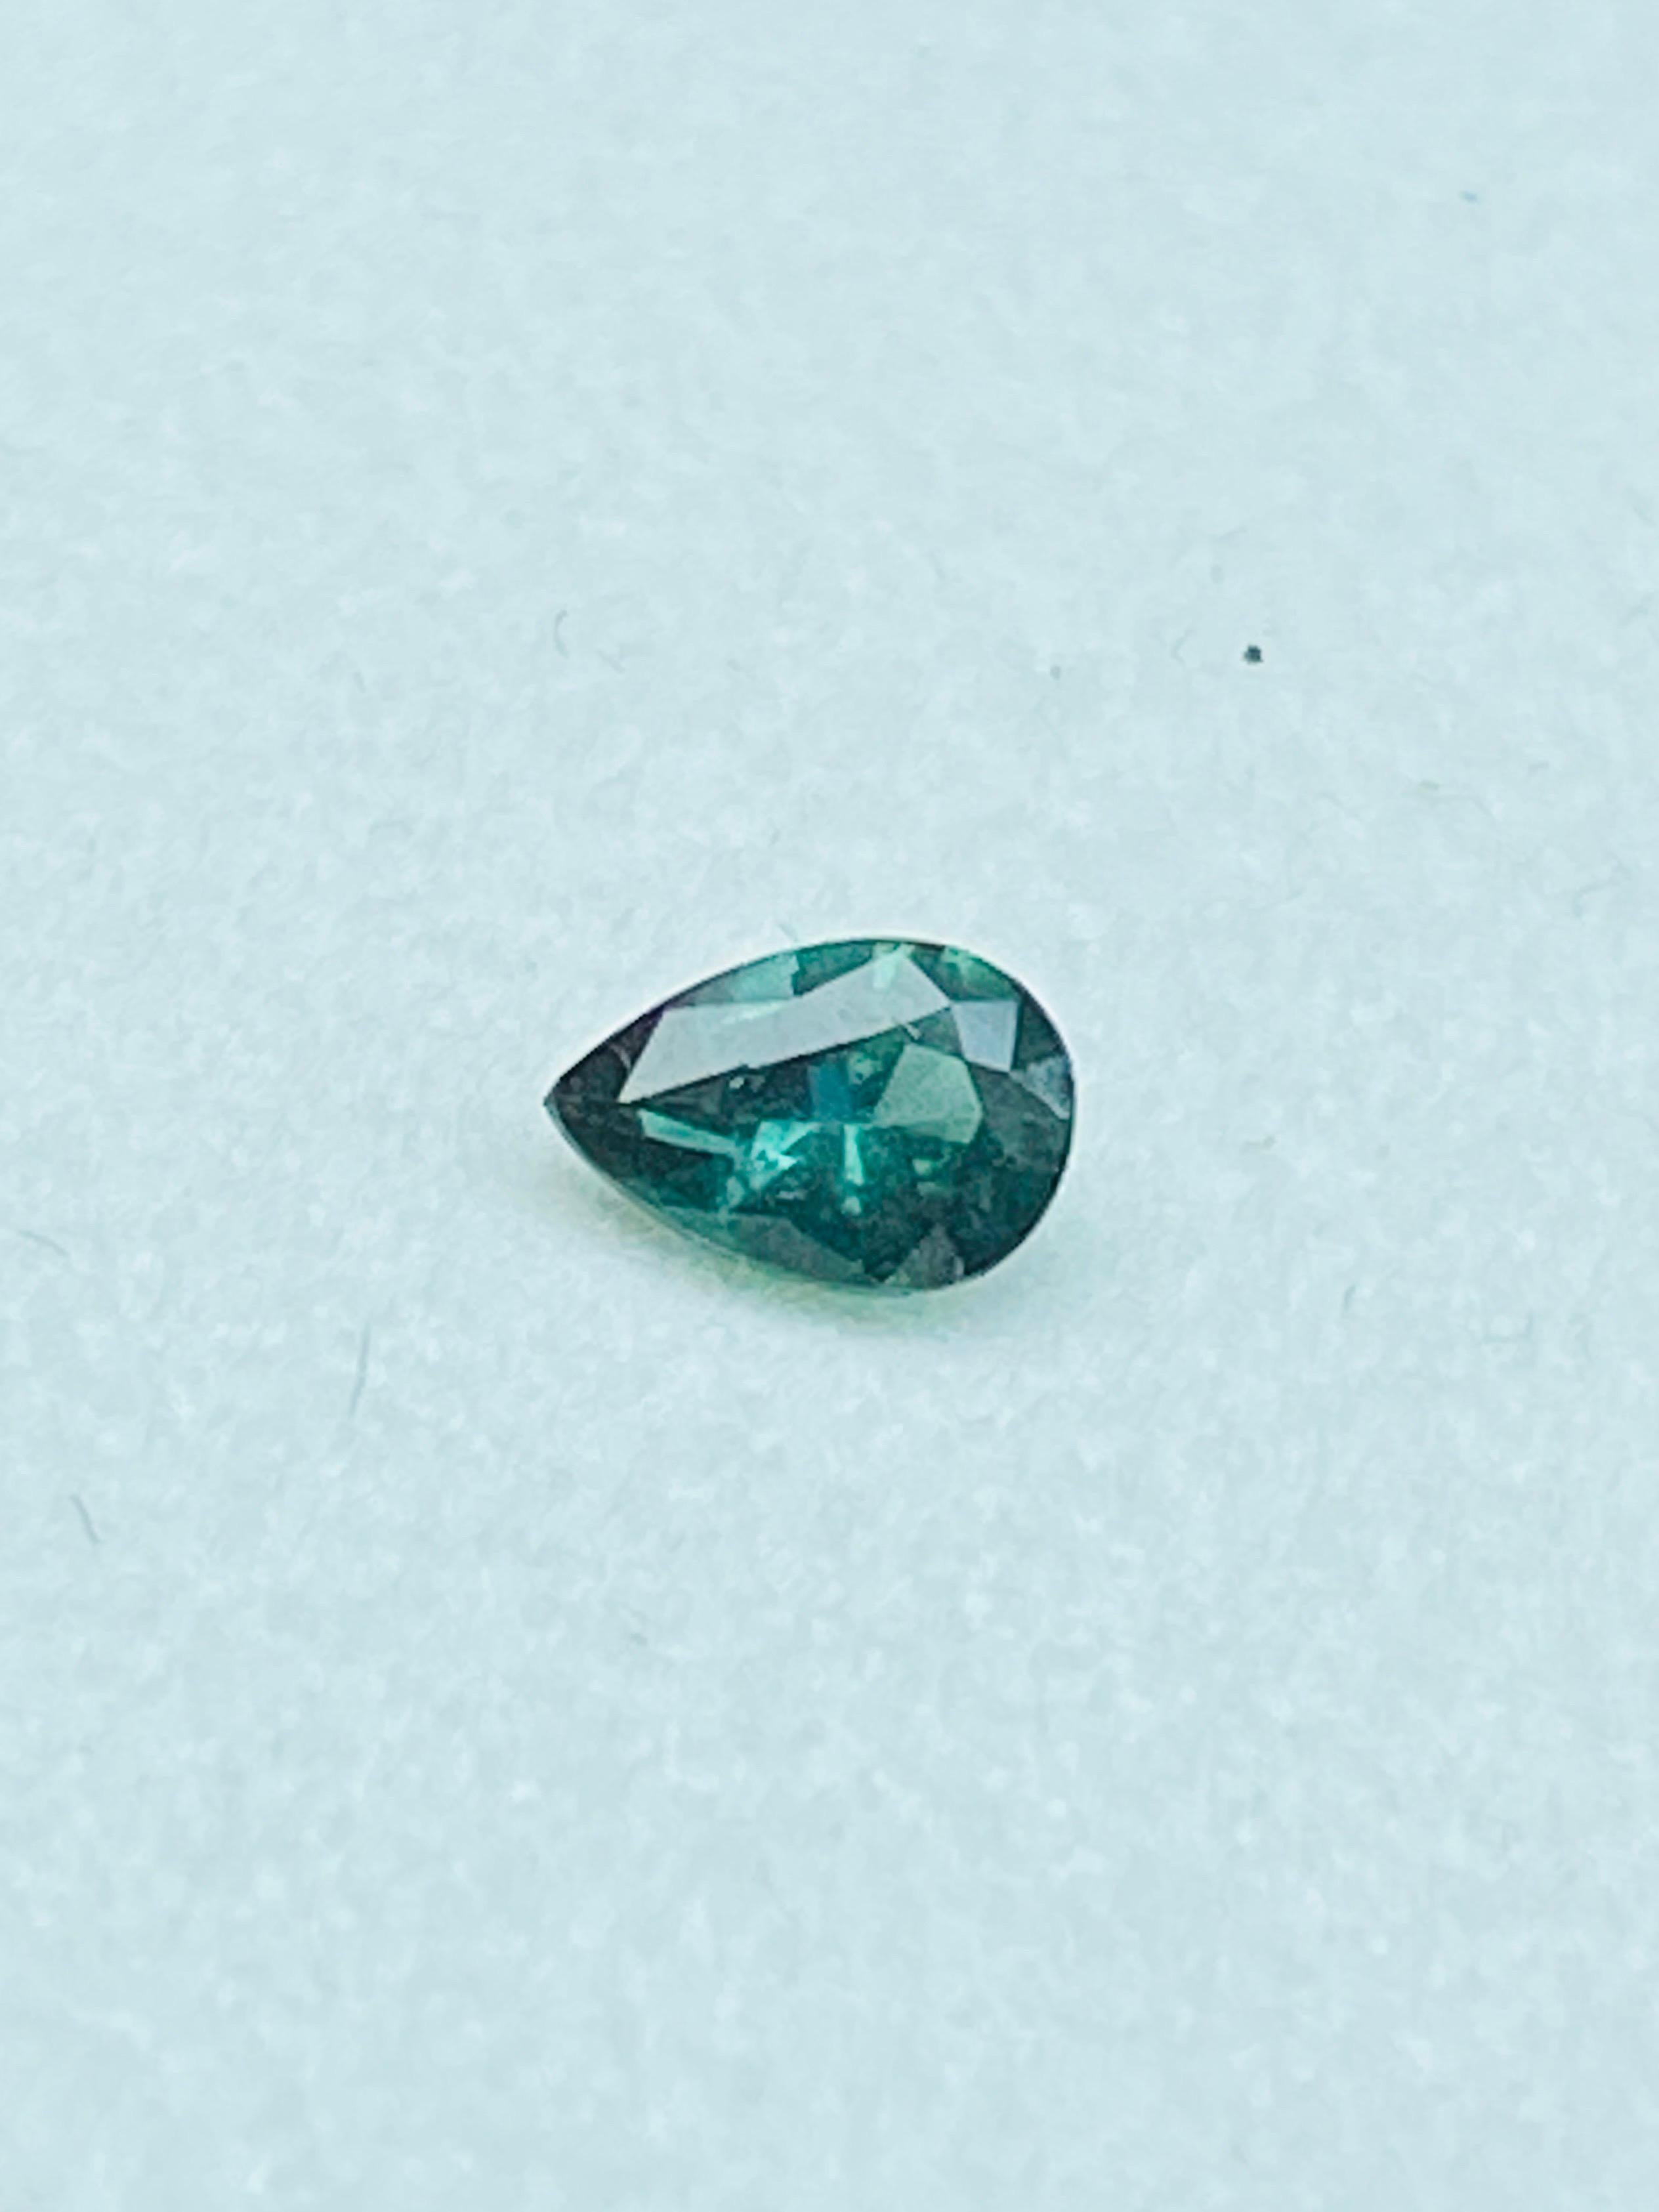 Pear Cut Alexandrite 0.22ct deep green to pinkish red color change rare gemstone 